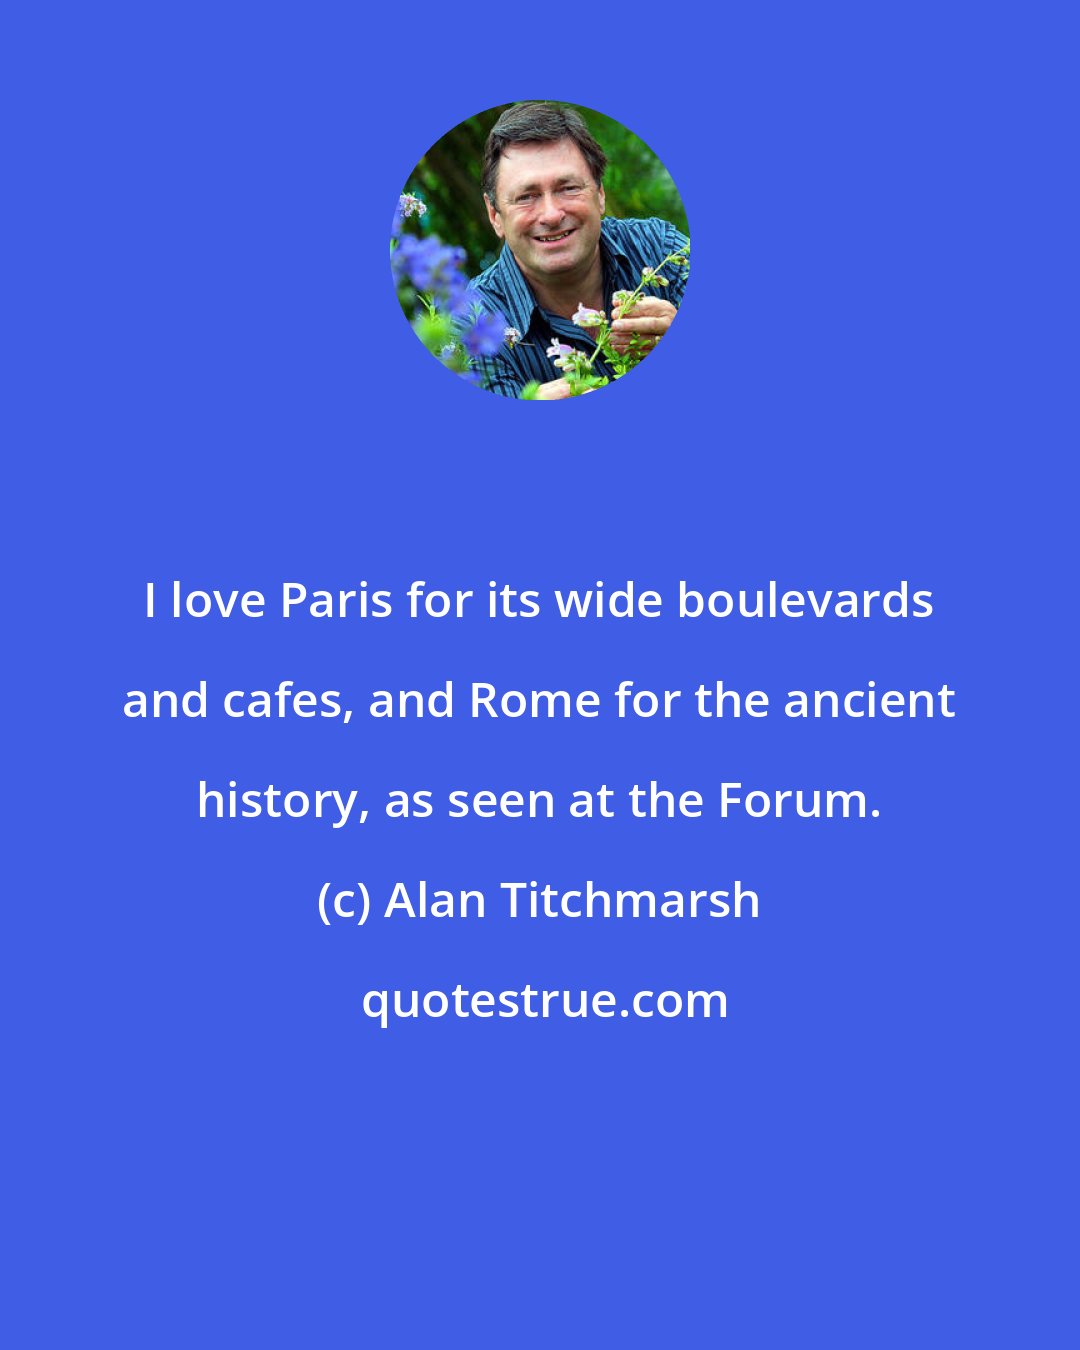 Alan Titchmarsh: I love Paris for its wide boulevards and cafes, and Rome for the ancient history, as seen at the Forum.